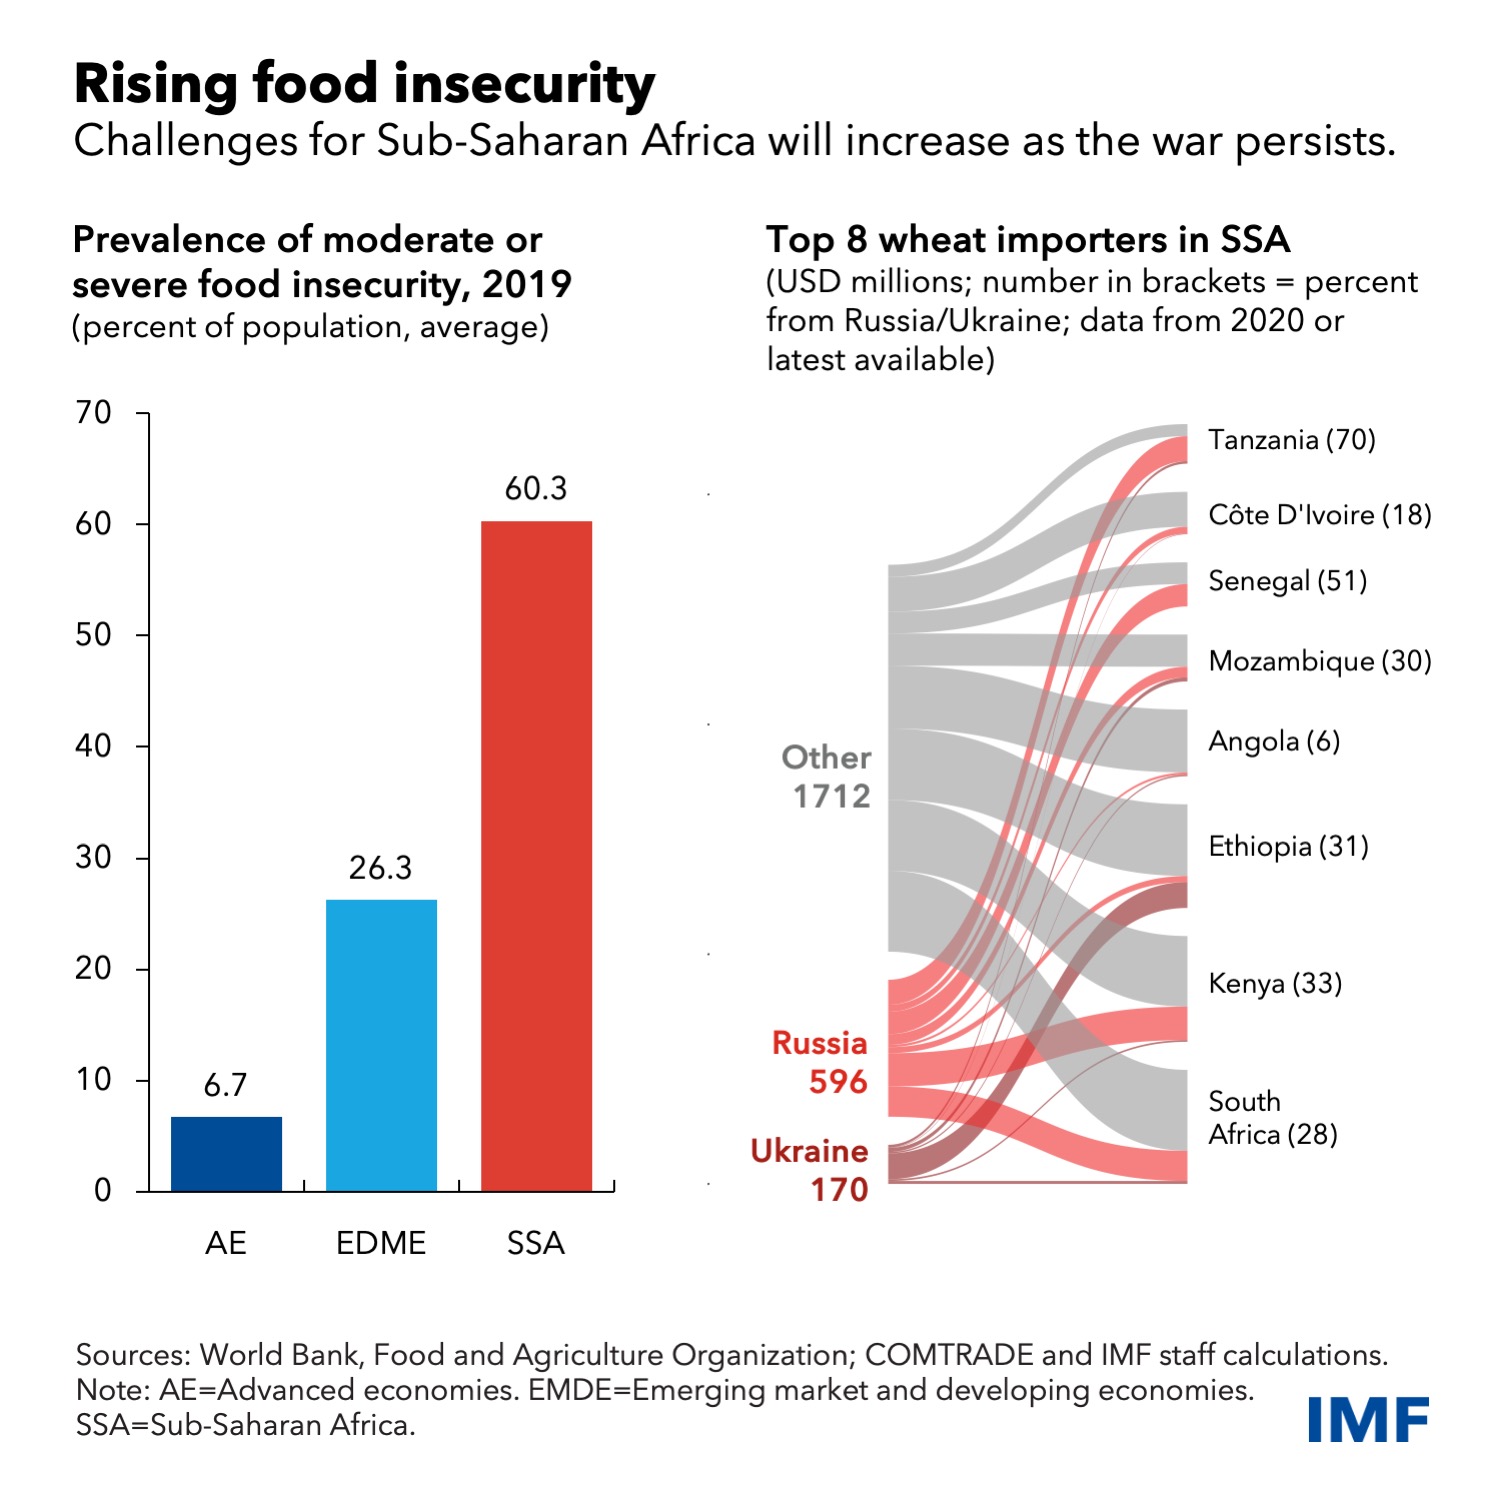 Prevalence of moderate or severe food insecurity in Africa in 2019 (left), and top eight wheat importers in Sub-Saharan Africa in 2020 (right). Challenges for food security in Sub-Saharan Africa will increase as Russia’s war on Ukraine persists. Graphic: IMF